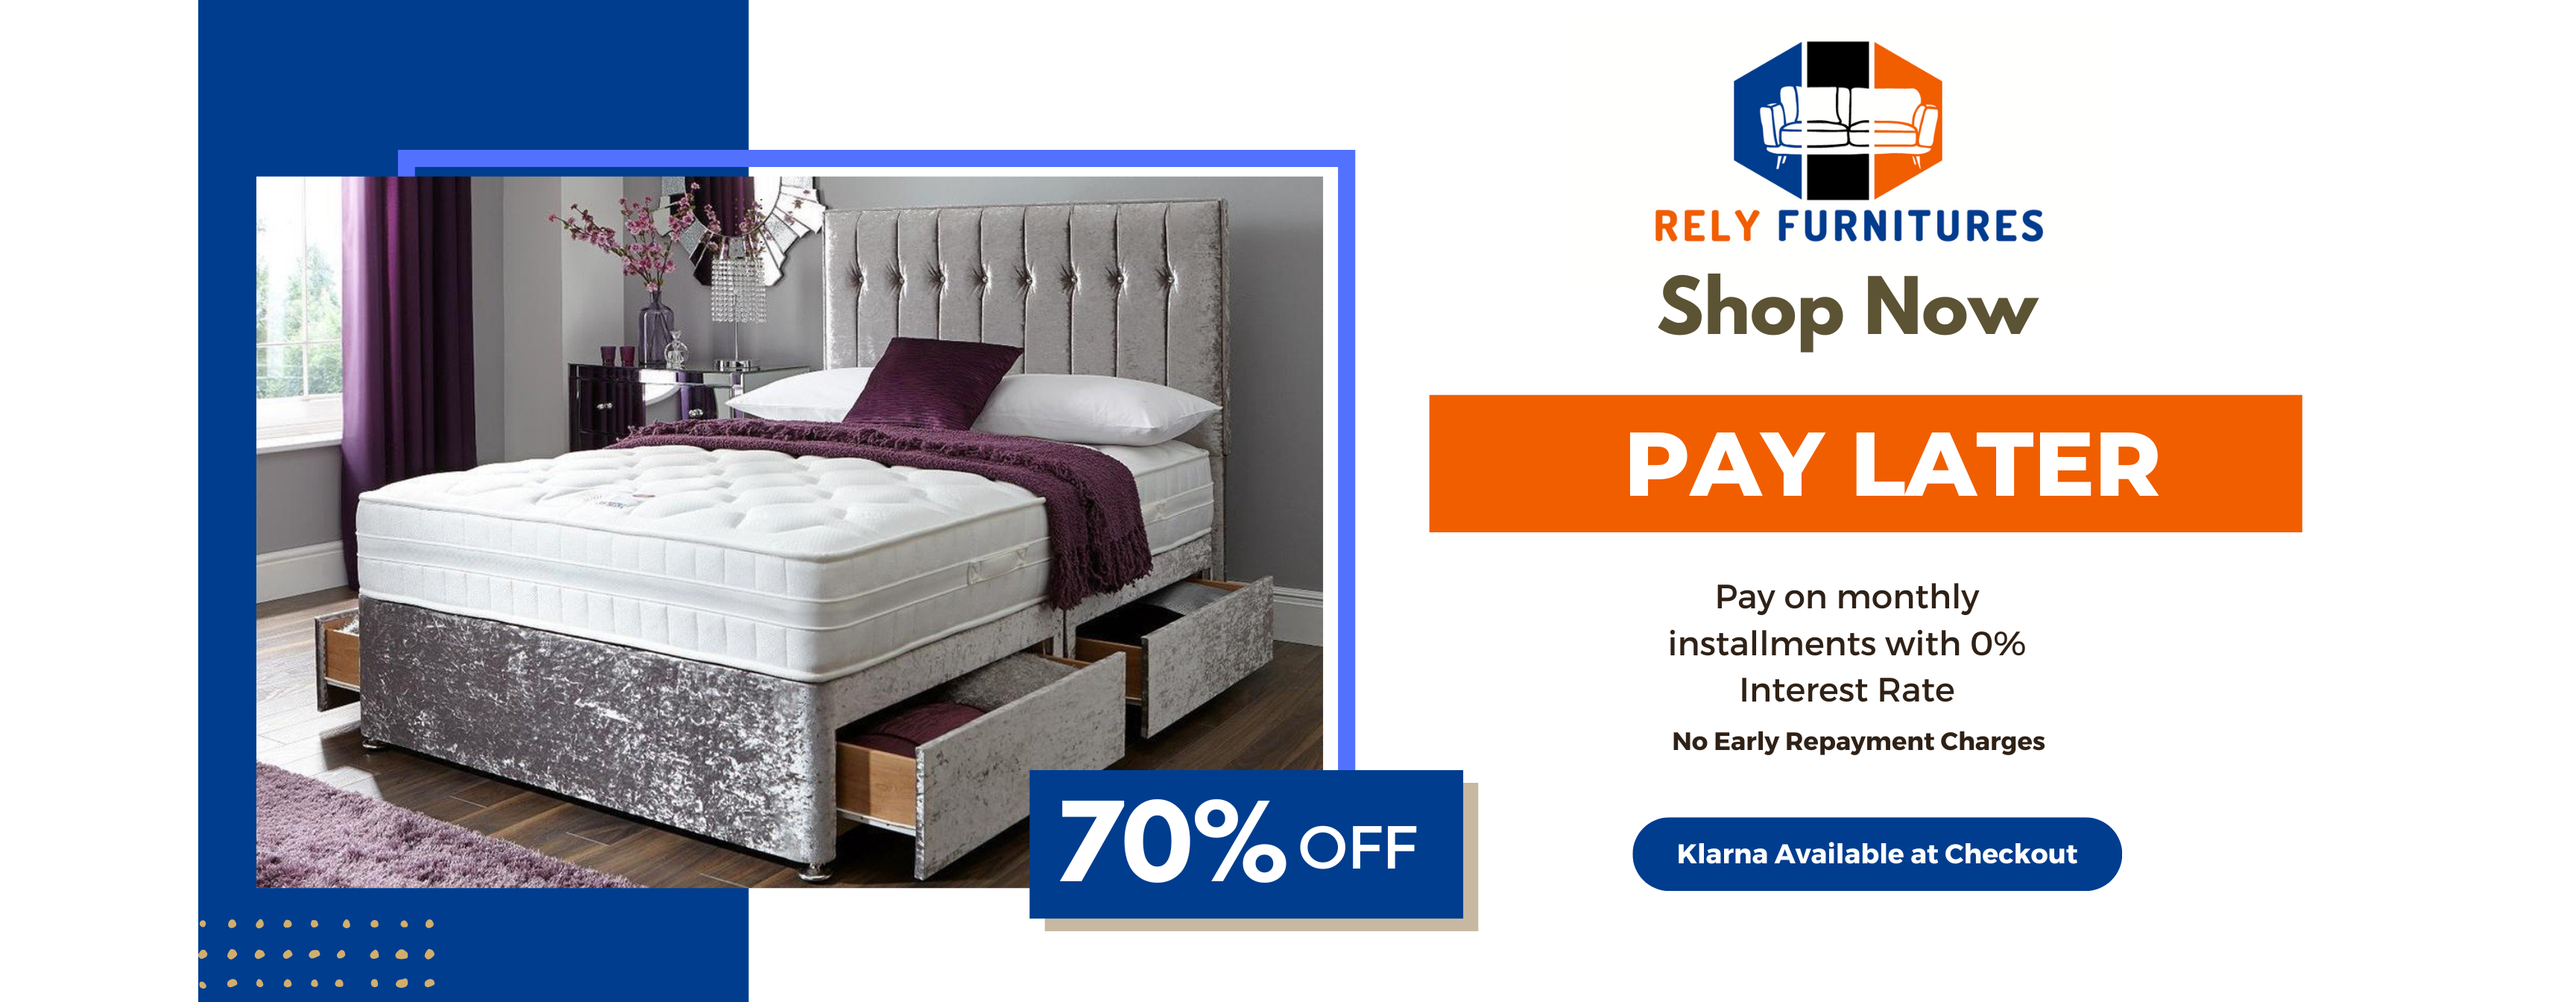 Rely Beds & Furnitures